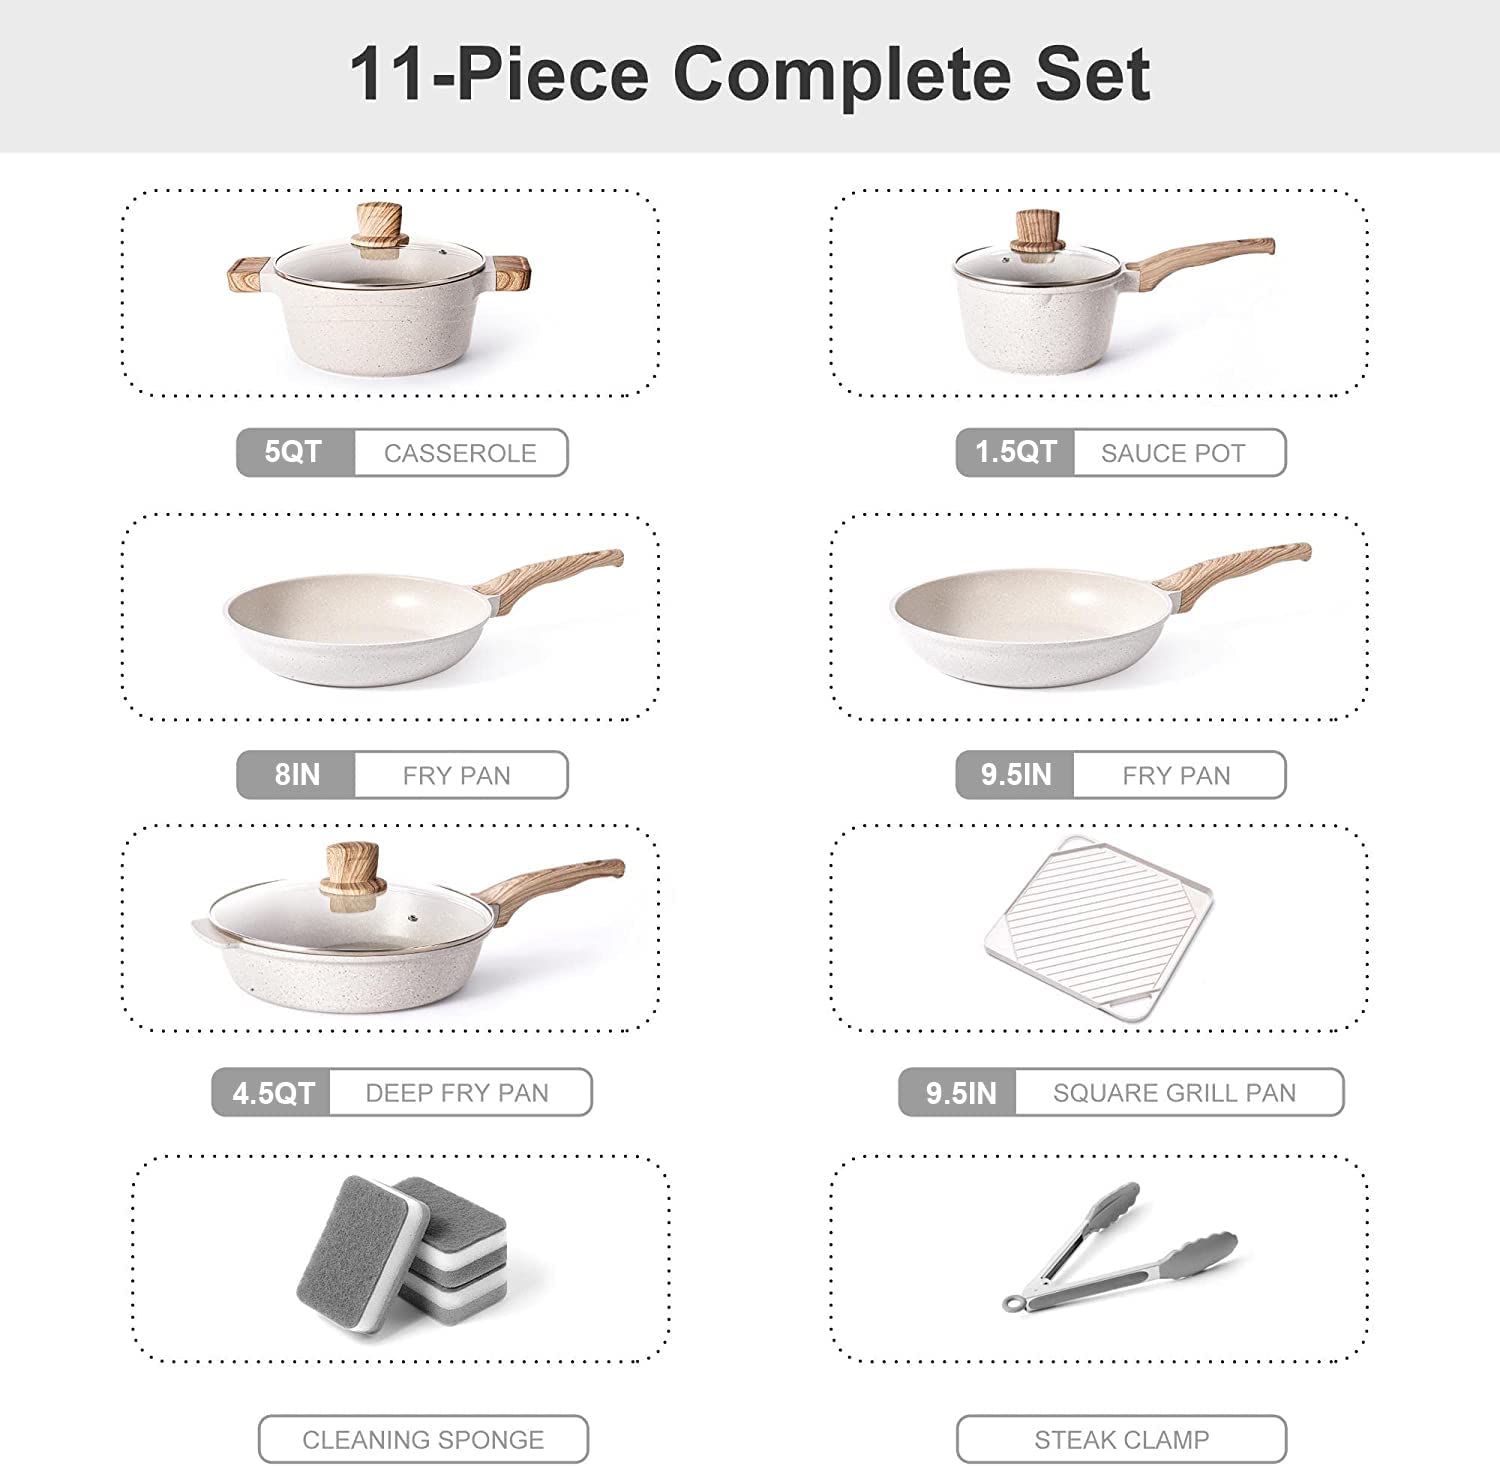 Pots and Pans Set - Caannasweis Nonstick Cookware Sets Granite Frying Pans for Cooking Marble Stone Kitchen Essentials 11 Piece Set Beige